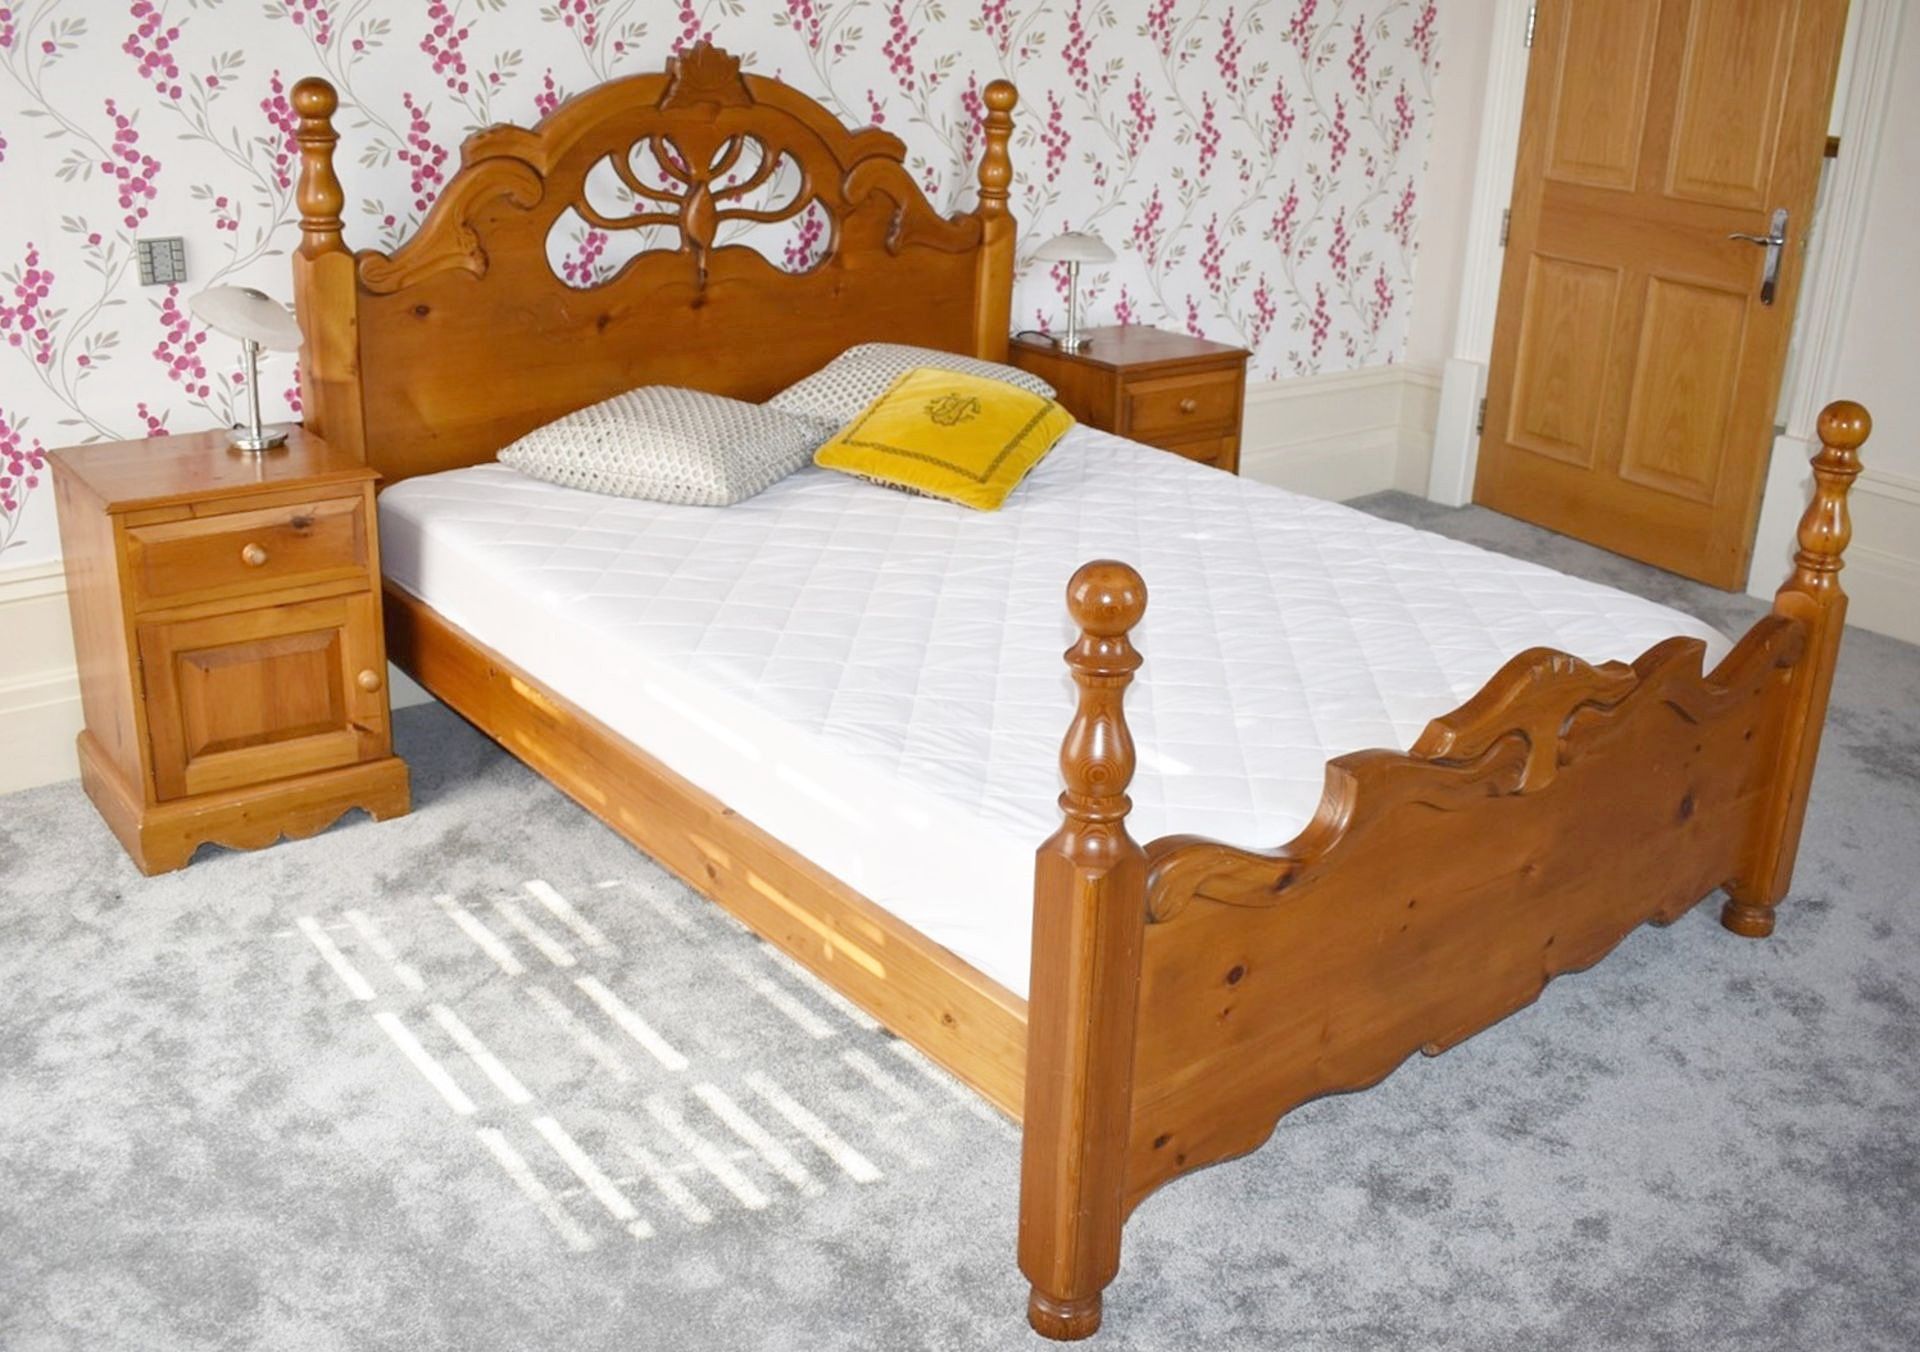 1 x Country Farmhouse Solid Pine Kingsize Bed Frame Featuring An Ornate Headboard & Footboard - NO - Image 4 of 7